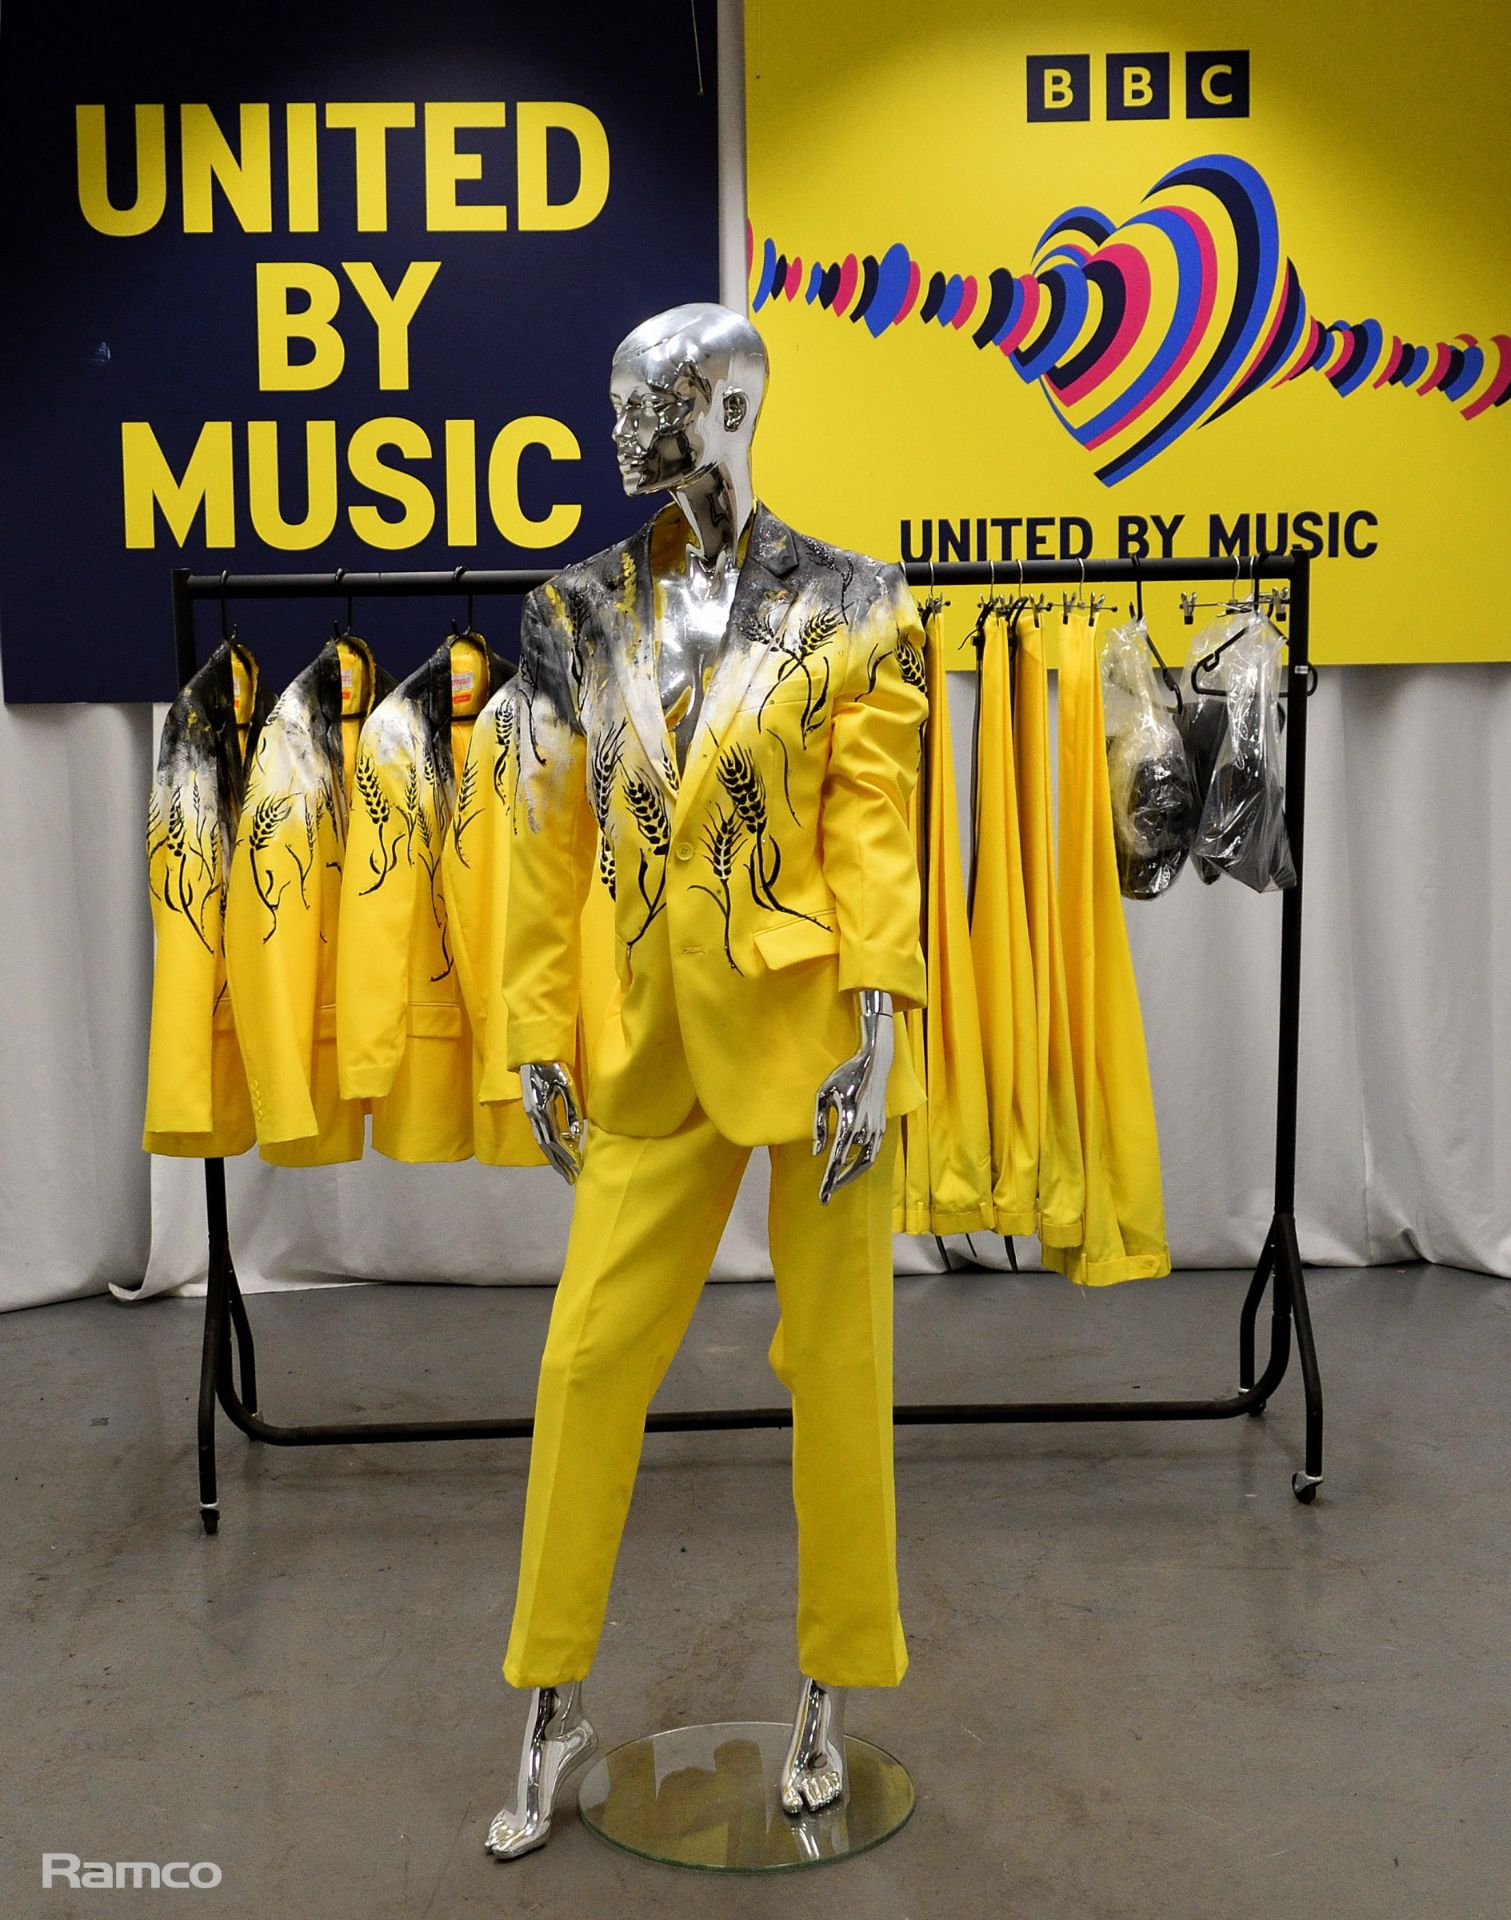 Yellow Outfits worn by backing dancers during the United by Music performance by Mariya Yaremchuck